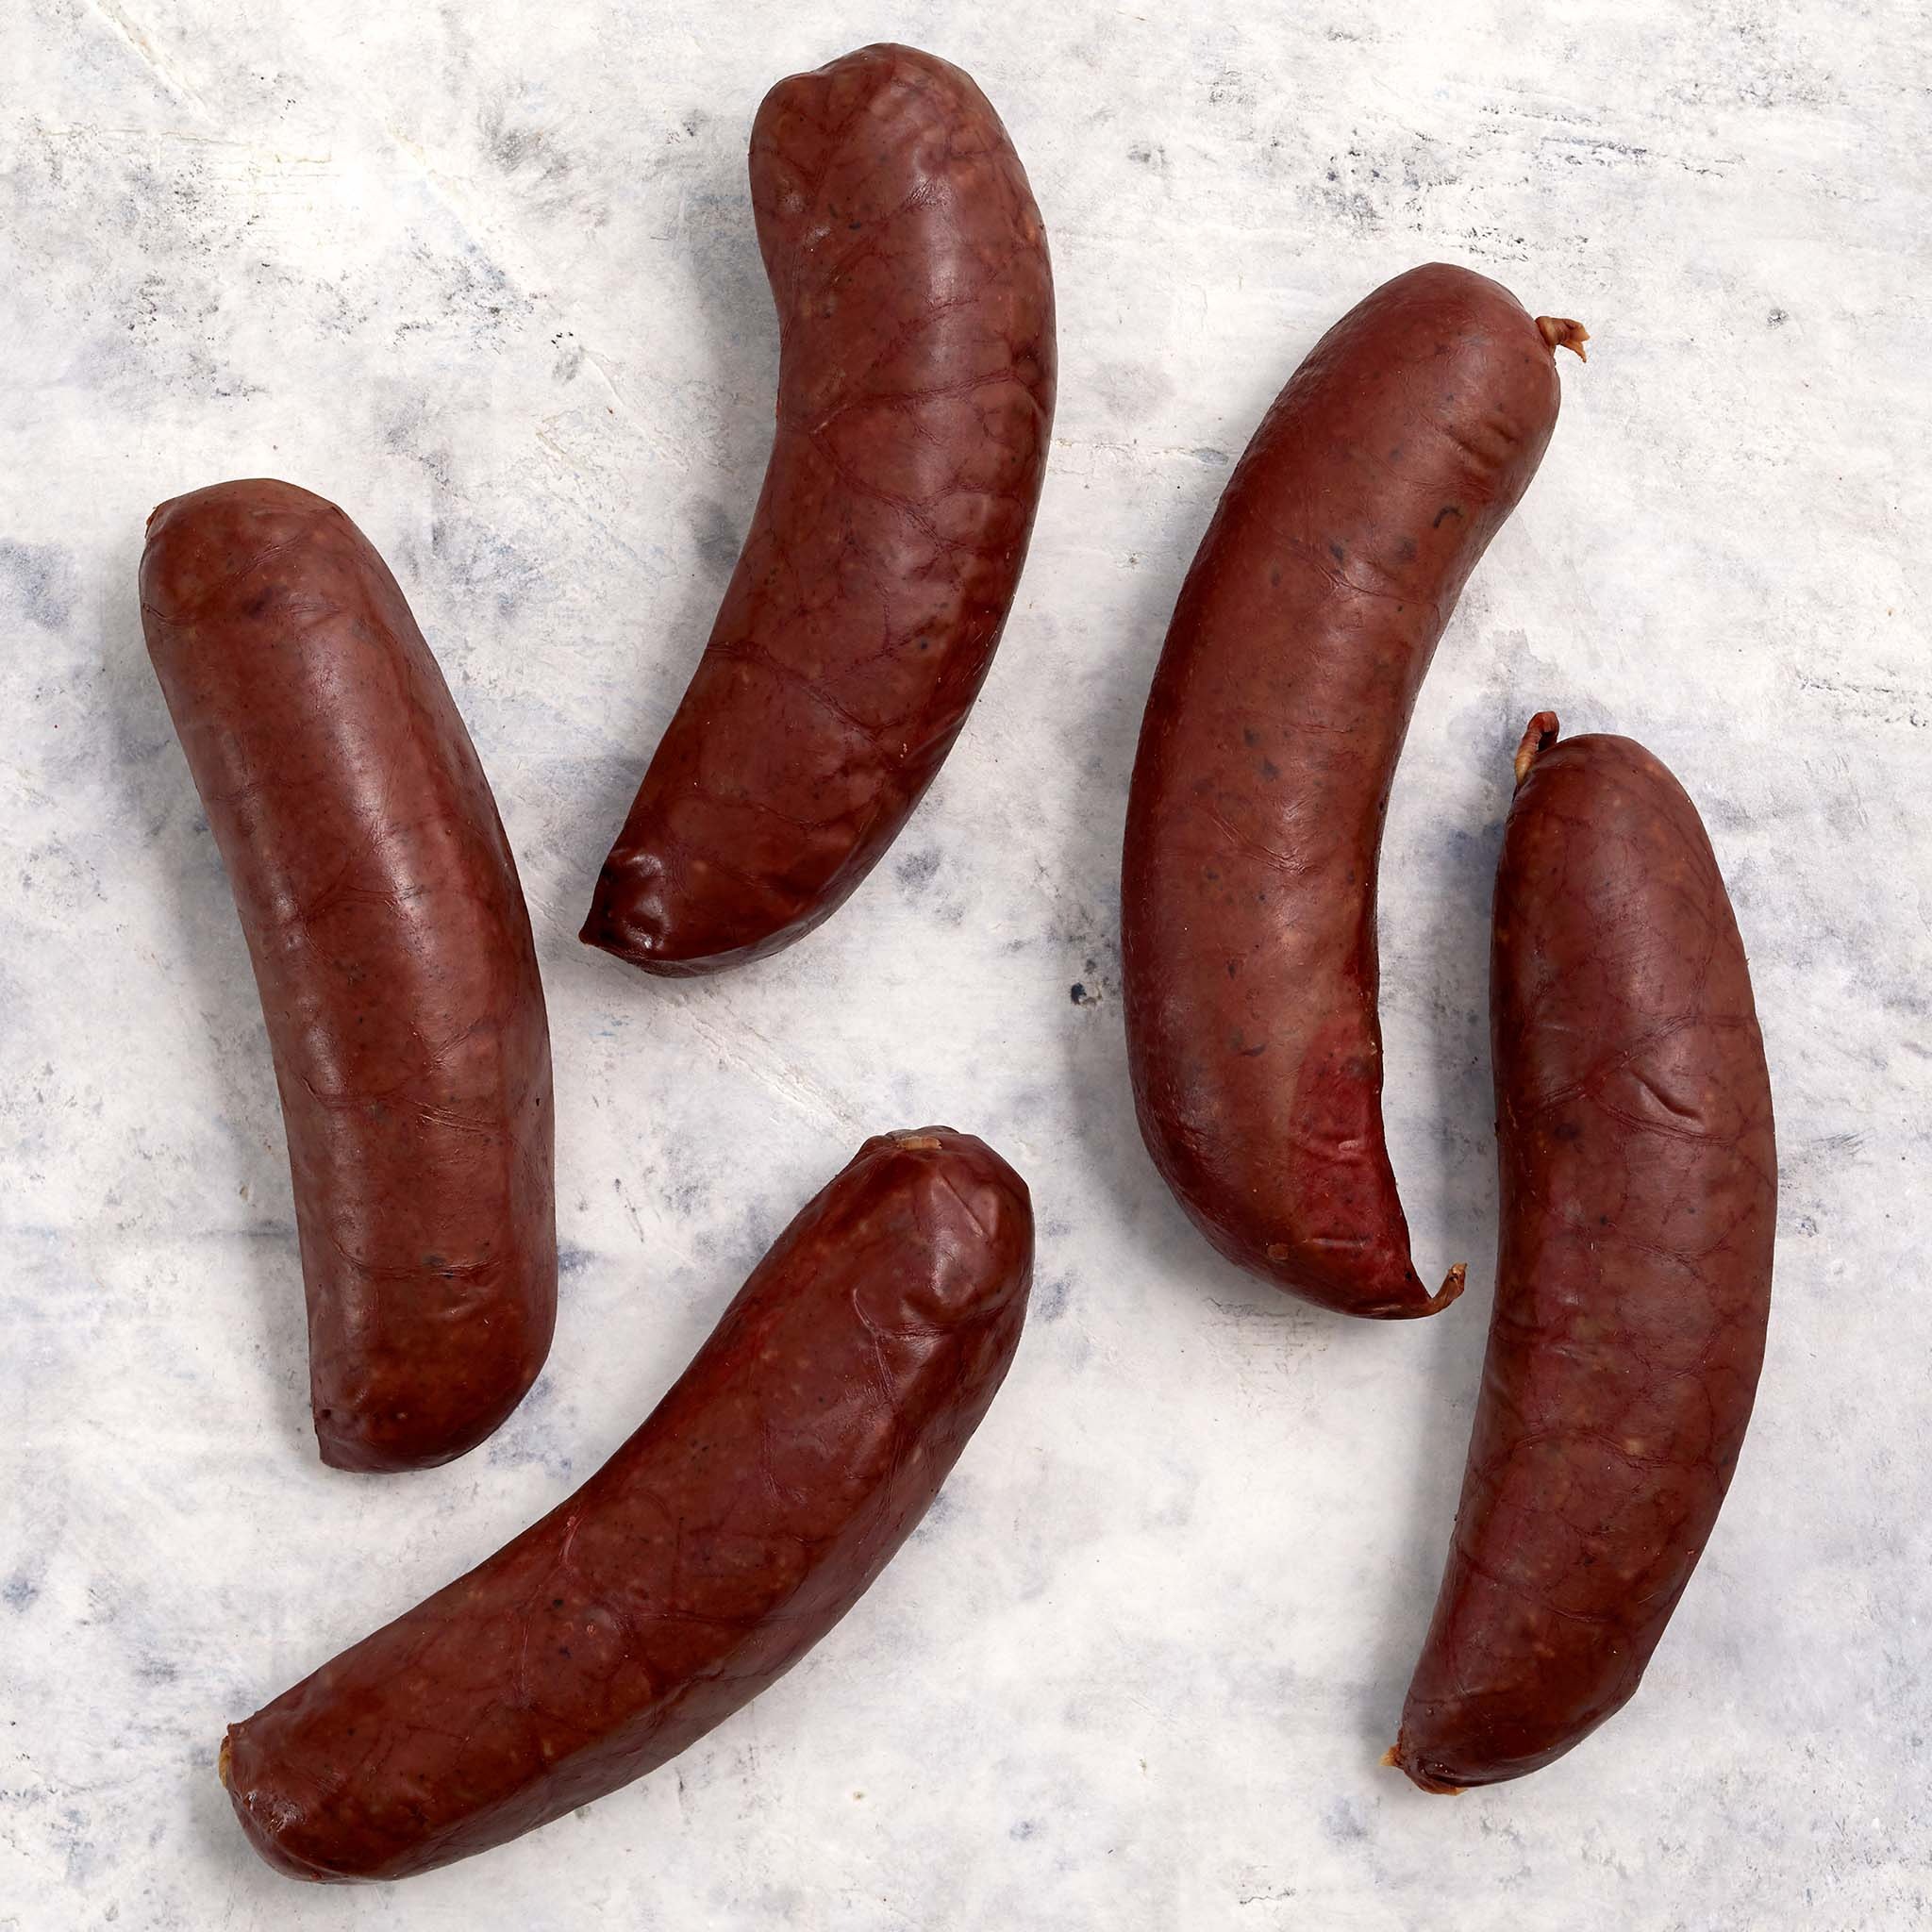 3756 WF RAW uncured argentinian style blood sausage 